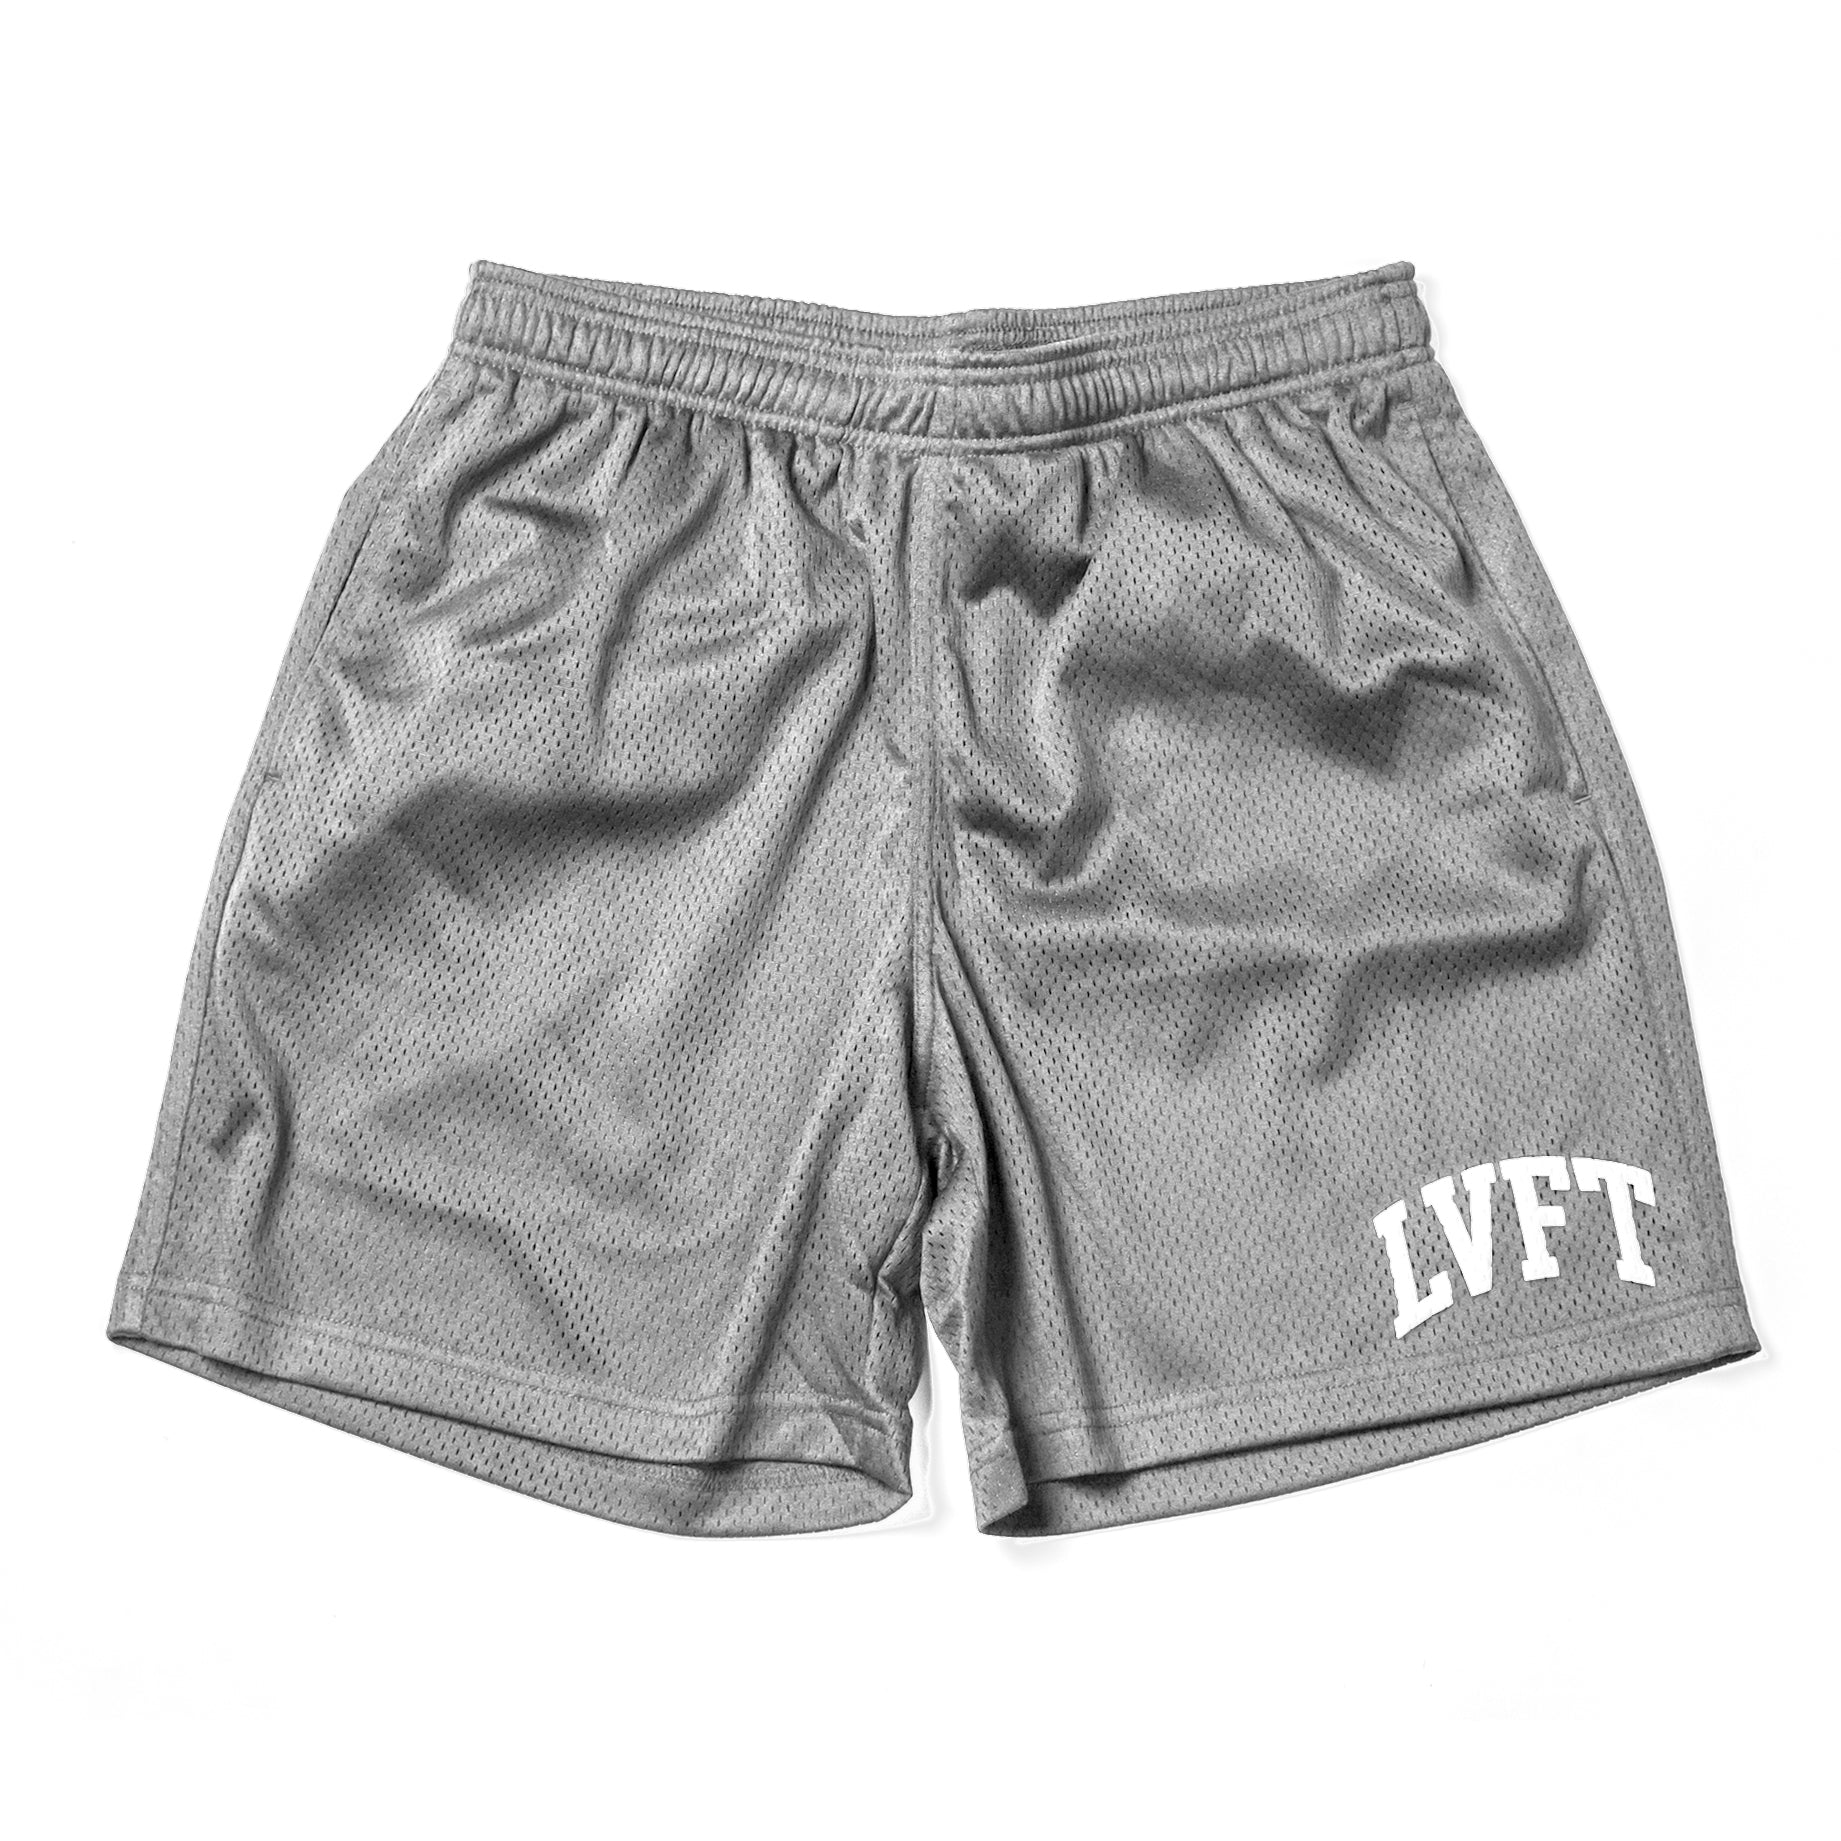 Contender Mesh Shorts Gray Live Fit. Apparel